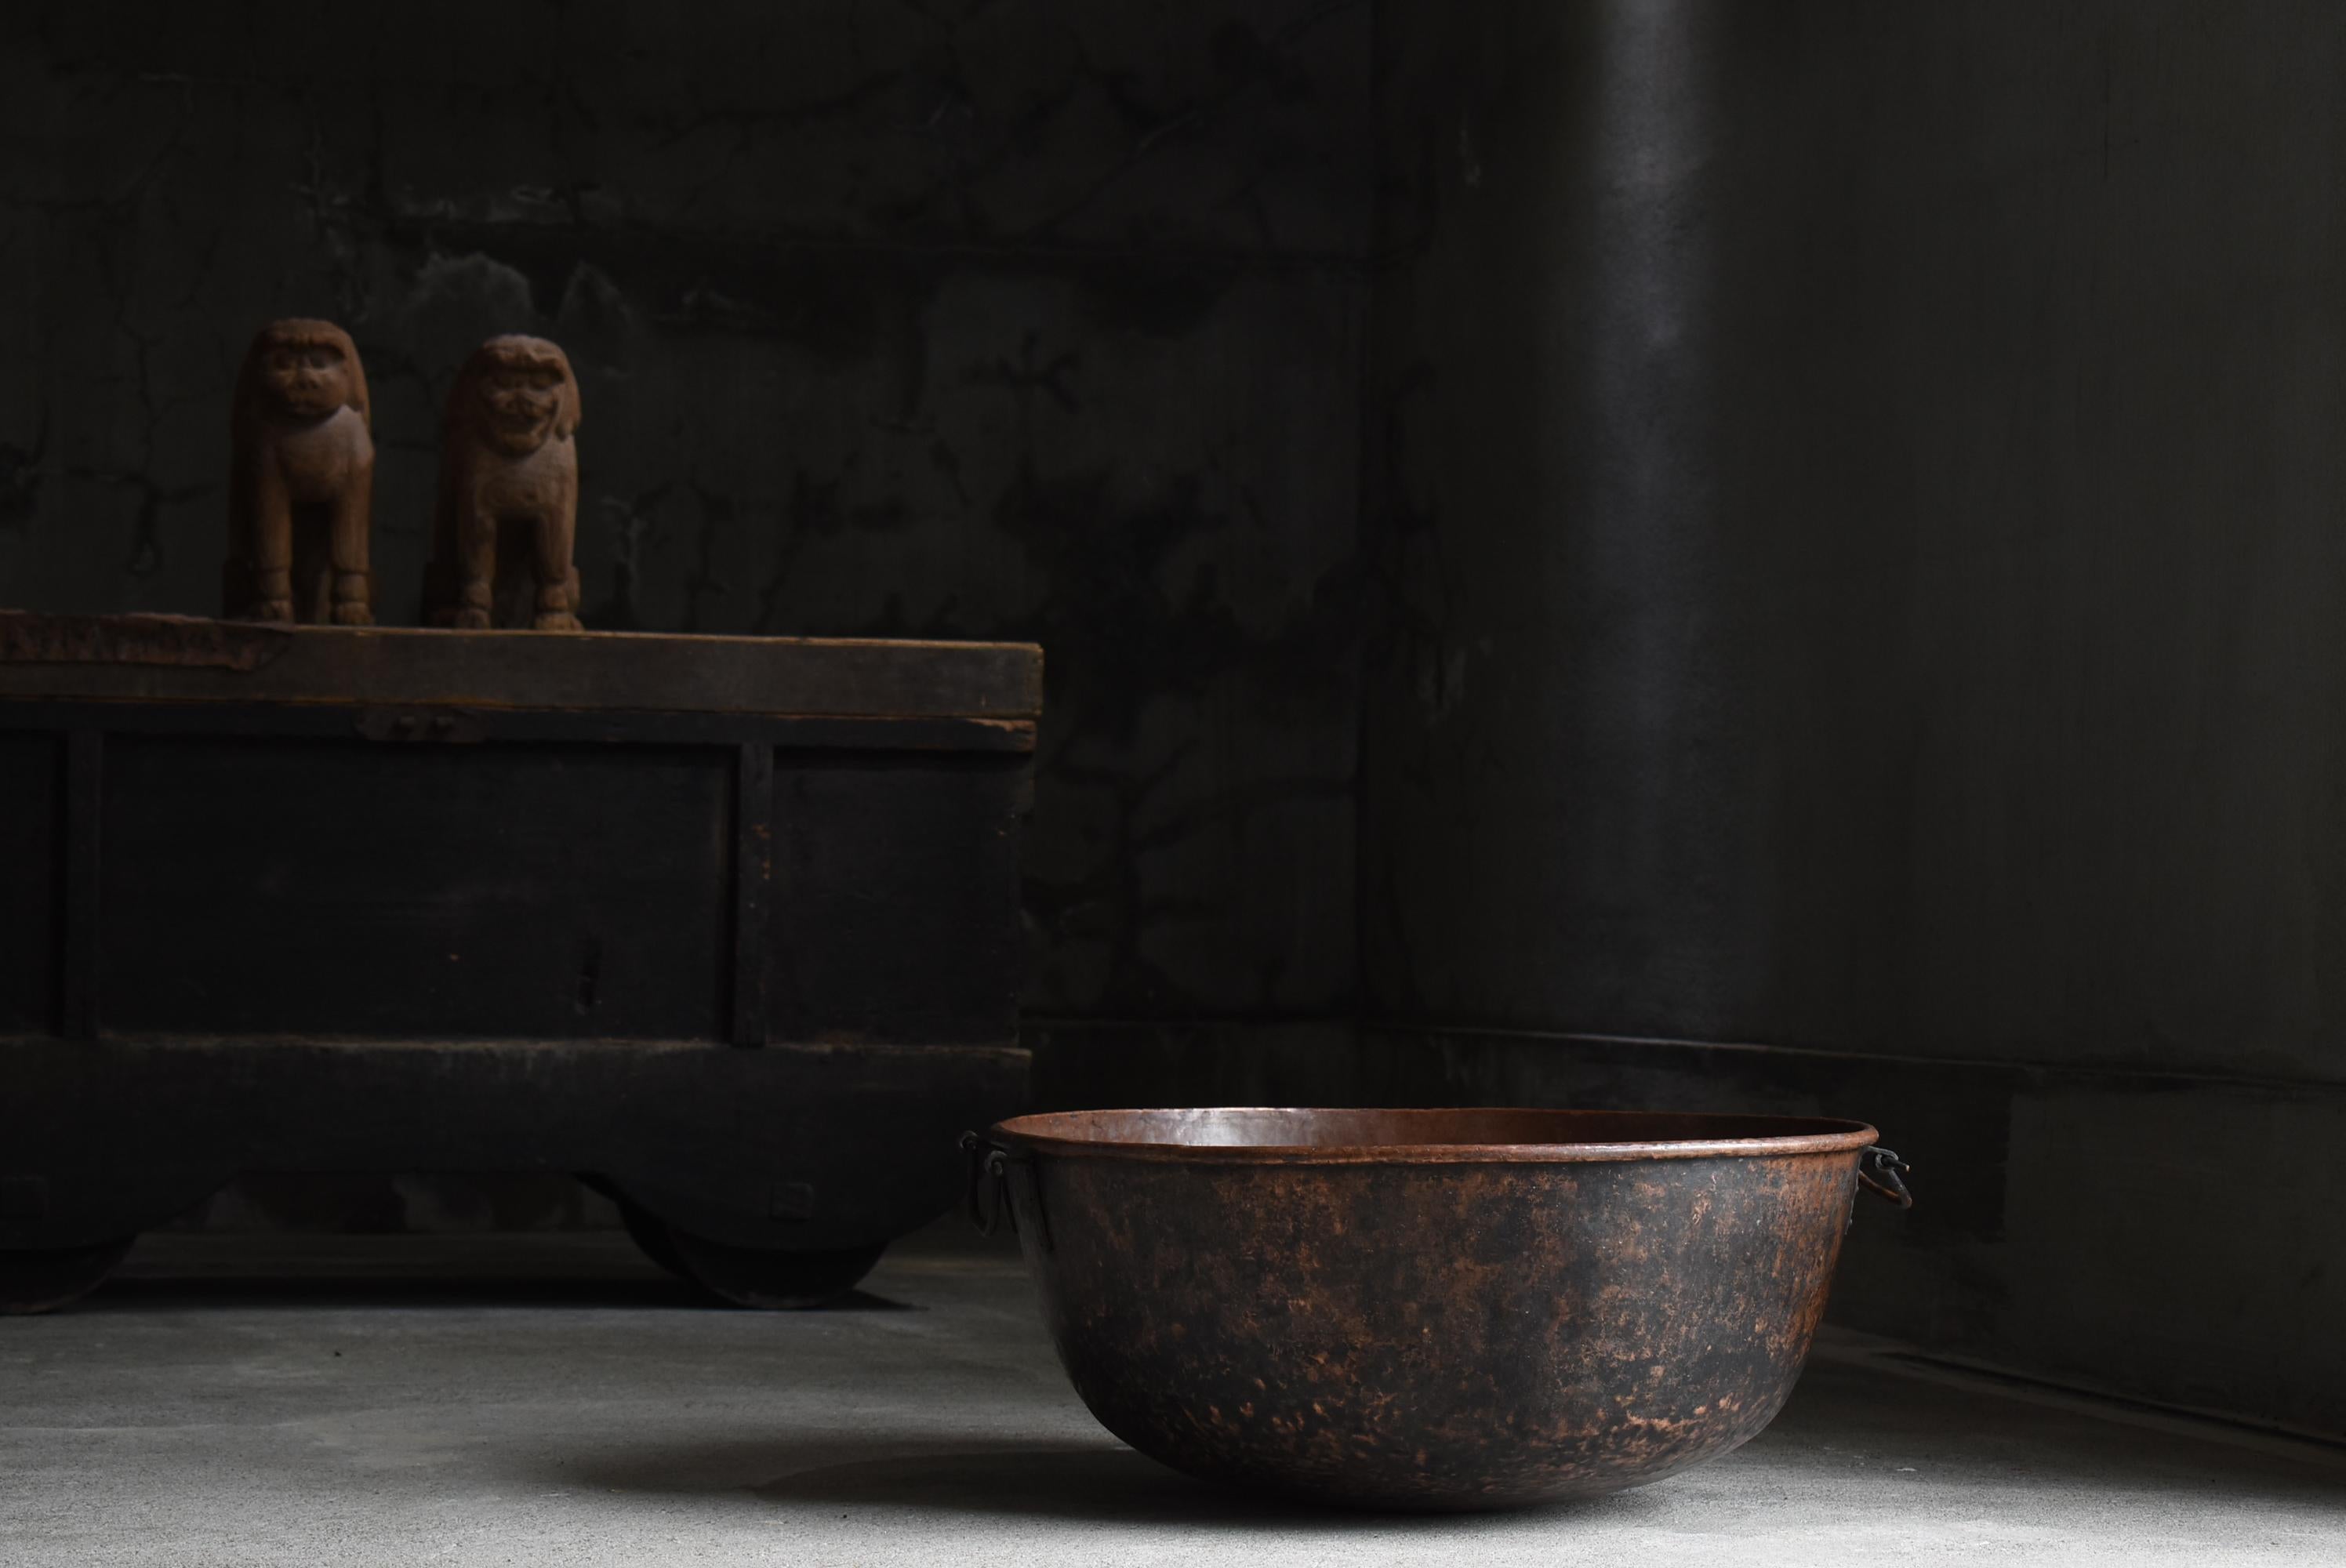 This is a very old and huge Japanese copper bowl.
This item is from the Meiji period (1900s-1940s).
All are made of copper.

I have never seen such a huge copper bowl.
I feel Japanese craftsmanship.

I can imagine various uses for them.

This is a